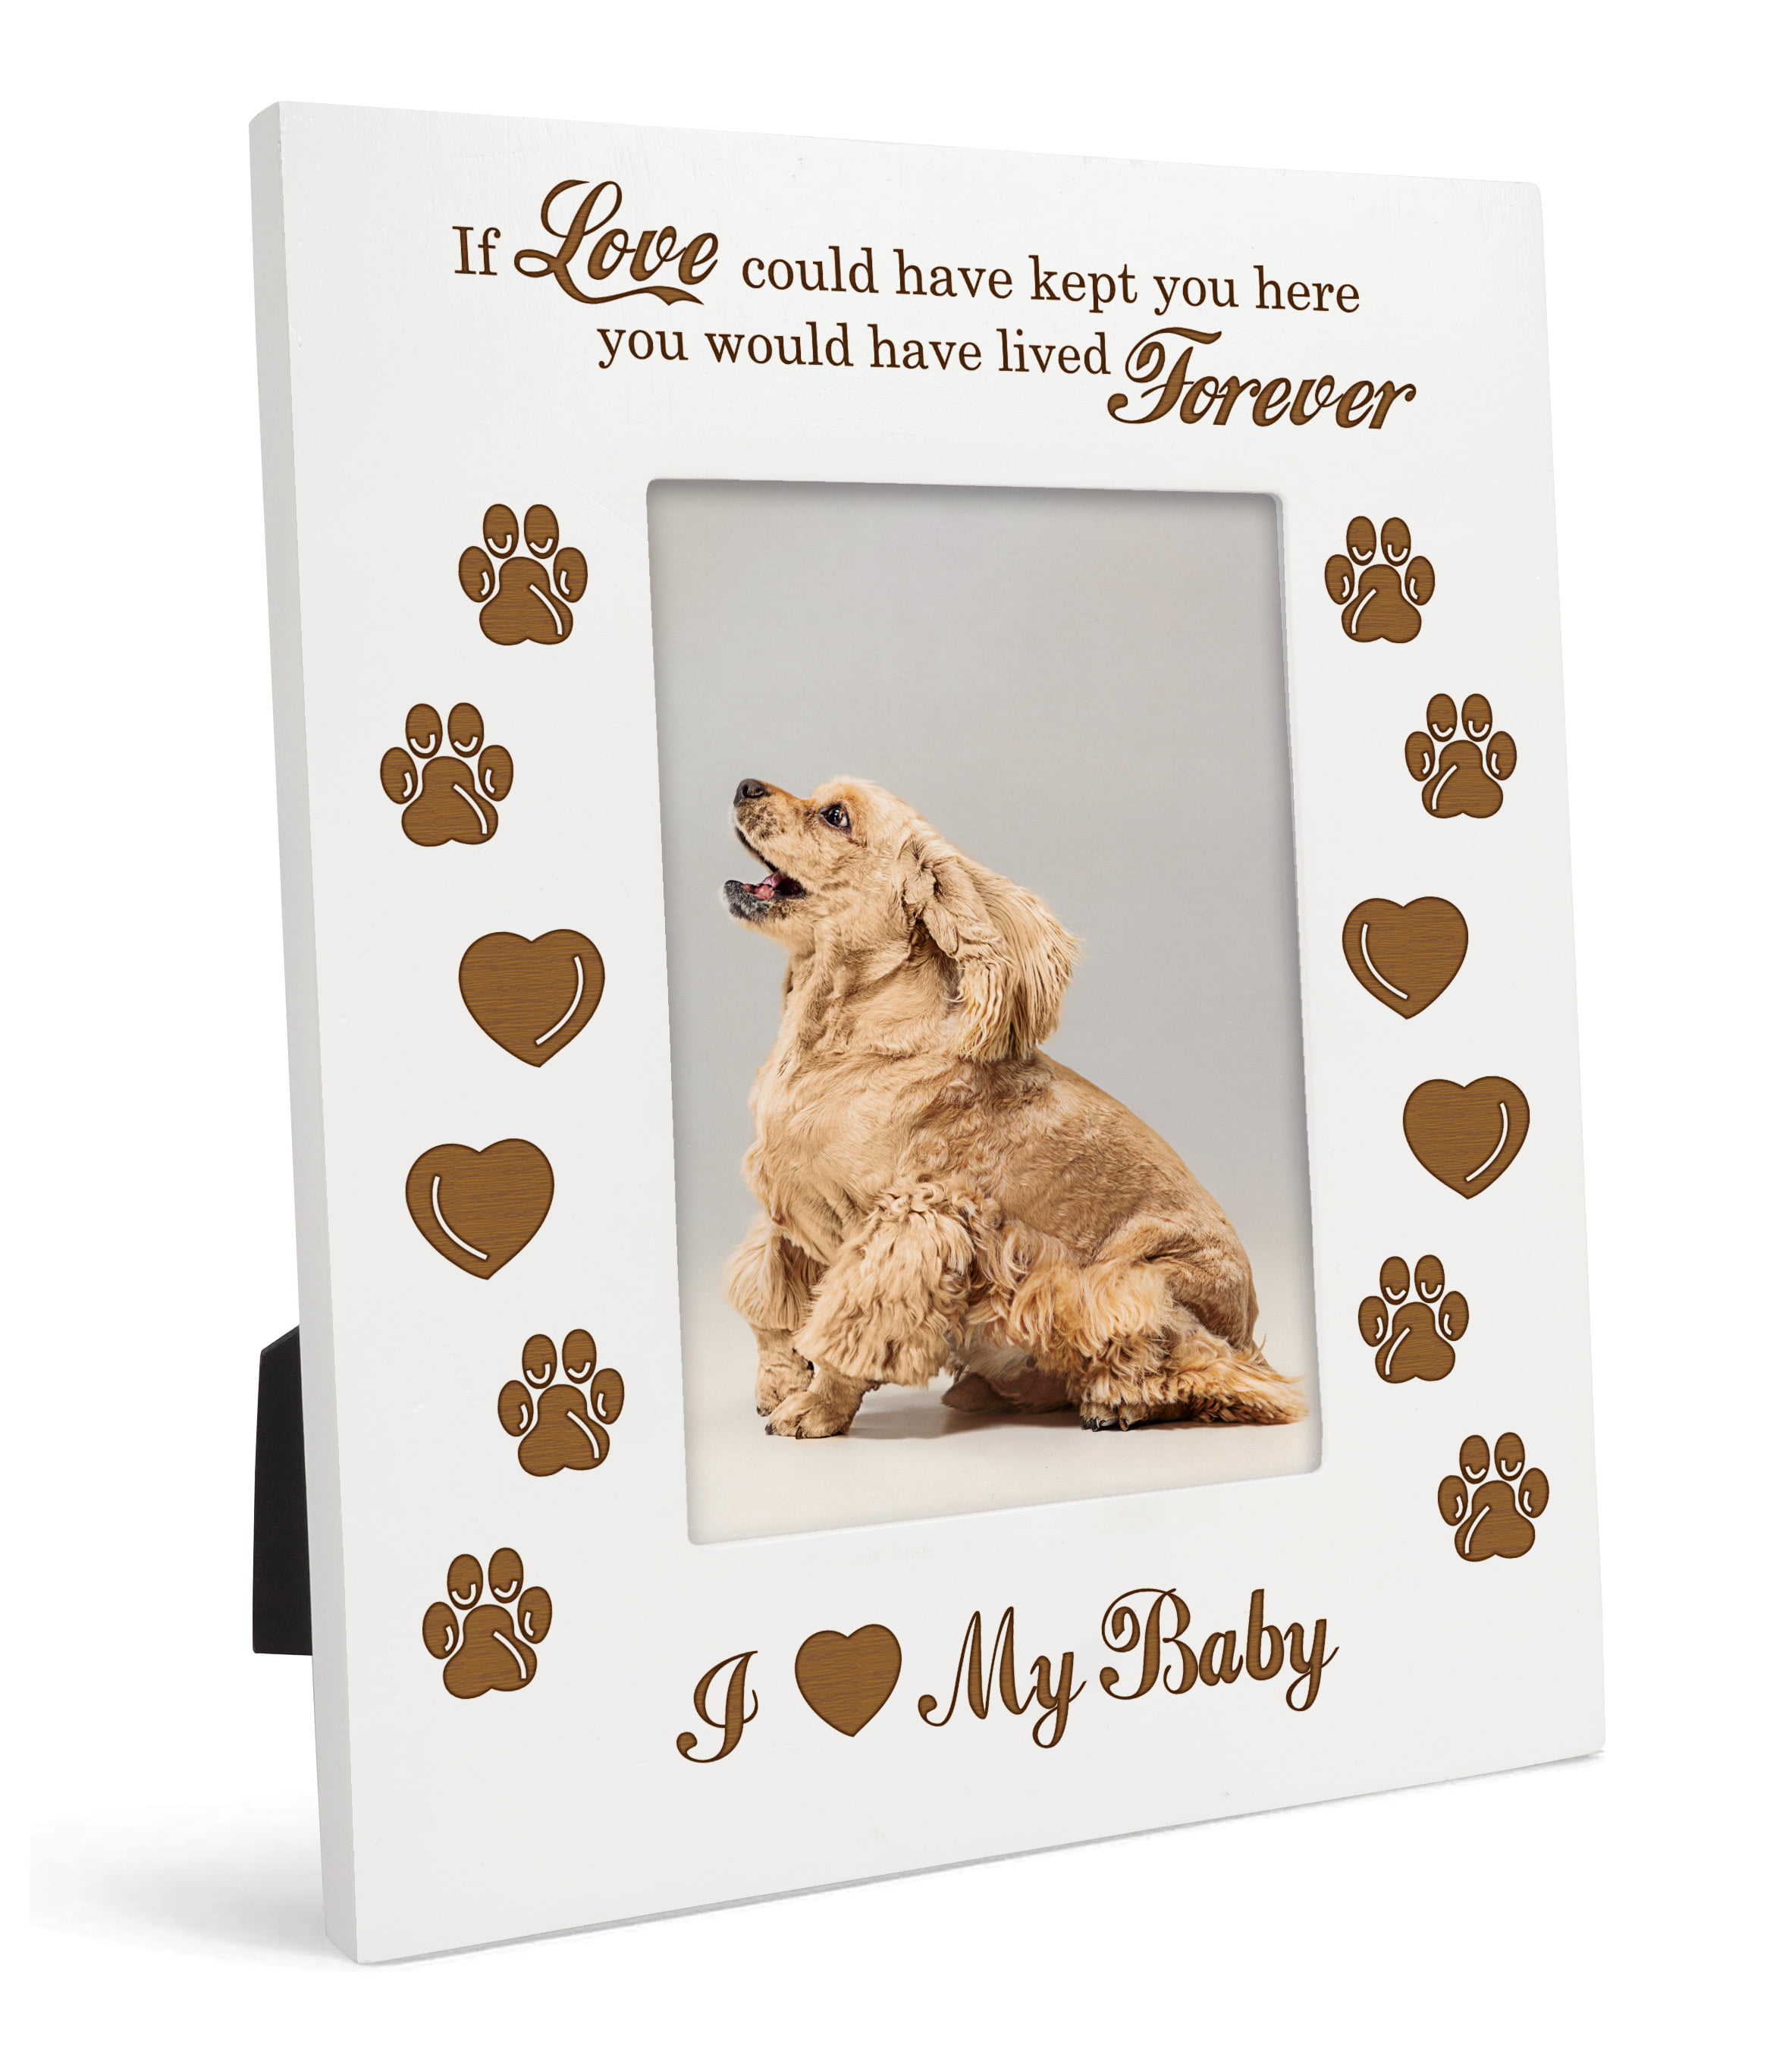 Best Dog Ever Engraved Wood Picture Frame-Dog lover gift-Doggie and me 